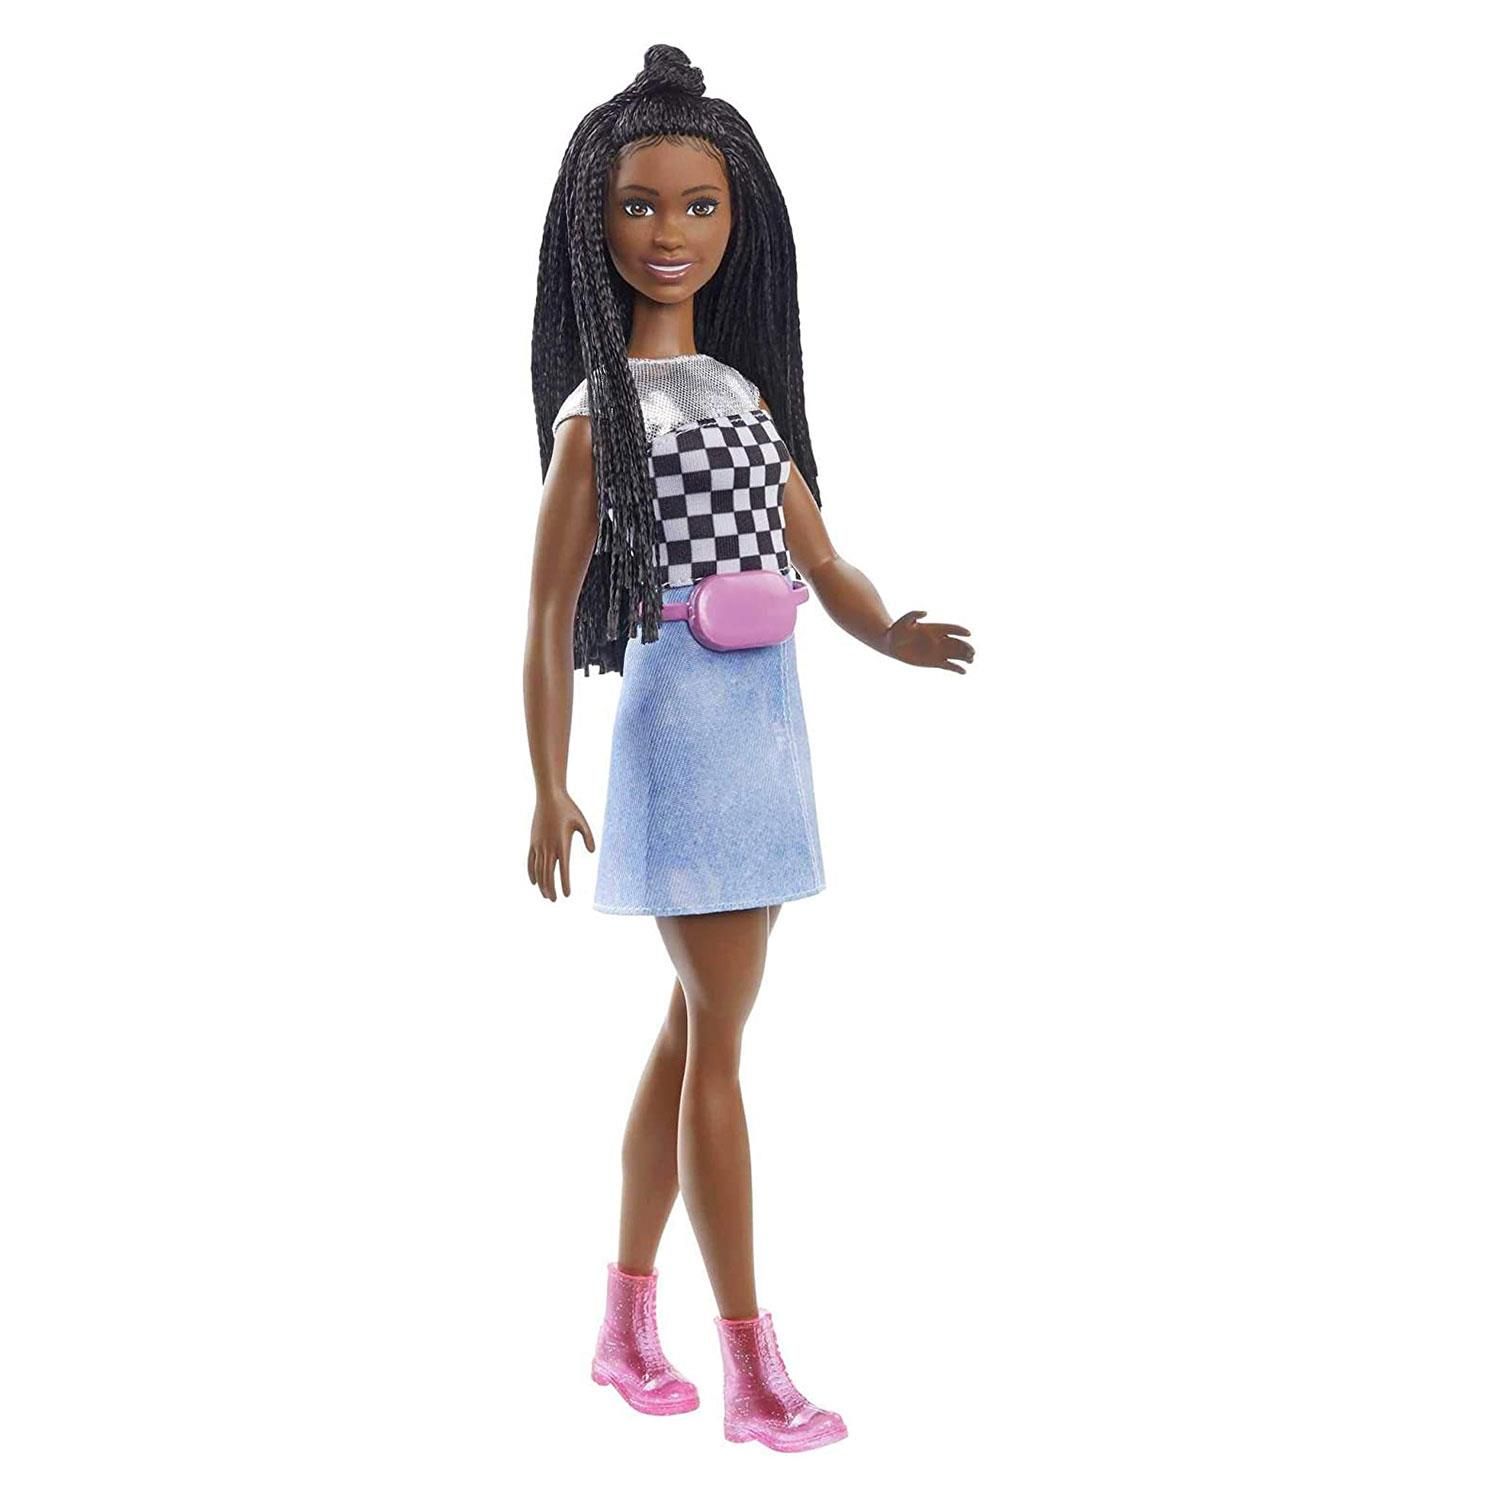 Imaginations can play out adventures under the city lights or the spotlight with dolls inspired by Barbie, Big City, Big Dreams! Sporting her signature onscreen style, Barbie 'Brooklyn' Roberts doll wears a vinyl skirt and a paneled top with silvery shimmer and checkered print. Her long, braided hair is styled in a trendy top bun with baby hair, and pink boots and a matching waist bag complete her stylish look. Kids ages 3 years old and up will love recreating favorite moments or dreaming up their own big adventures with dolls and playsets inspired by Barbie: Big City, Big Dreams! Each is sold separately, subject to availability. Doll cannot stand alone. Colors and decorations may vary.

Join Barbie and her friends on their biggest adventure yet with dolls inspired by Barbie: Big City, Big Dreams!
Barbie 'Brooklyn' Roberts doll comes dressed in a vinyl skirt and paneled t-shirt with silvery shimmer and checkered print.
Casual pink boots are perfect for exploring the city, and a matching waist bag completes her stylish look.
Her long, braided hair is styled in a trendy top bun accented with baby hairs.
With a Barbie doll in her signature outfit, 3 to 7-year-olds can imagine all kinds of stories under the city lights or the spotlight!


Brand: Barbie
Age range: 3+ Years
Part Number: GXT04
Material: Plastic

Package Includes: Barbie Big City Big Dream Brooklyn Doll & Accessories